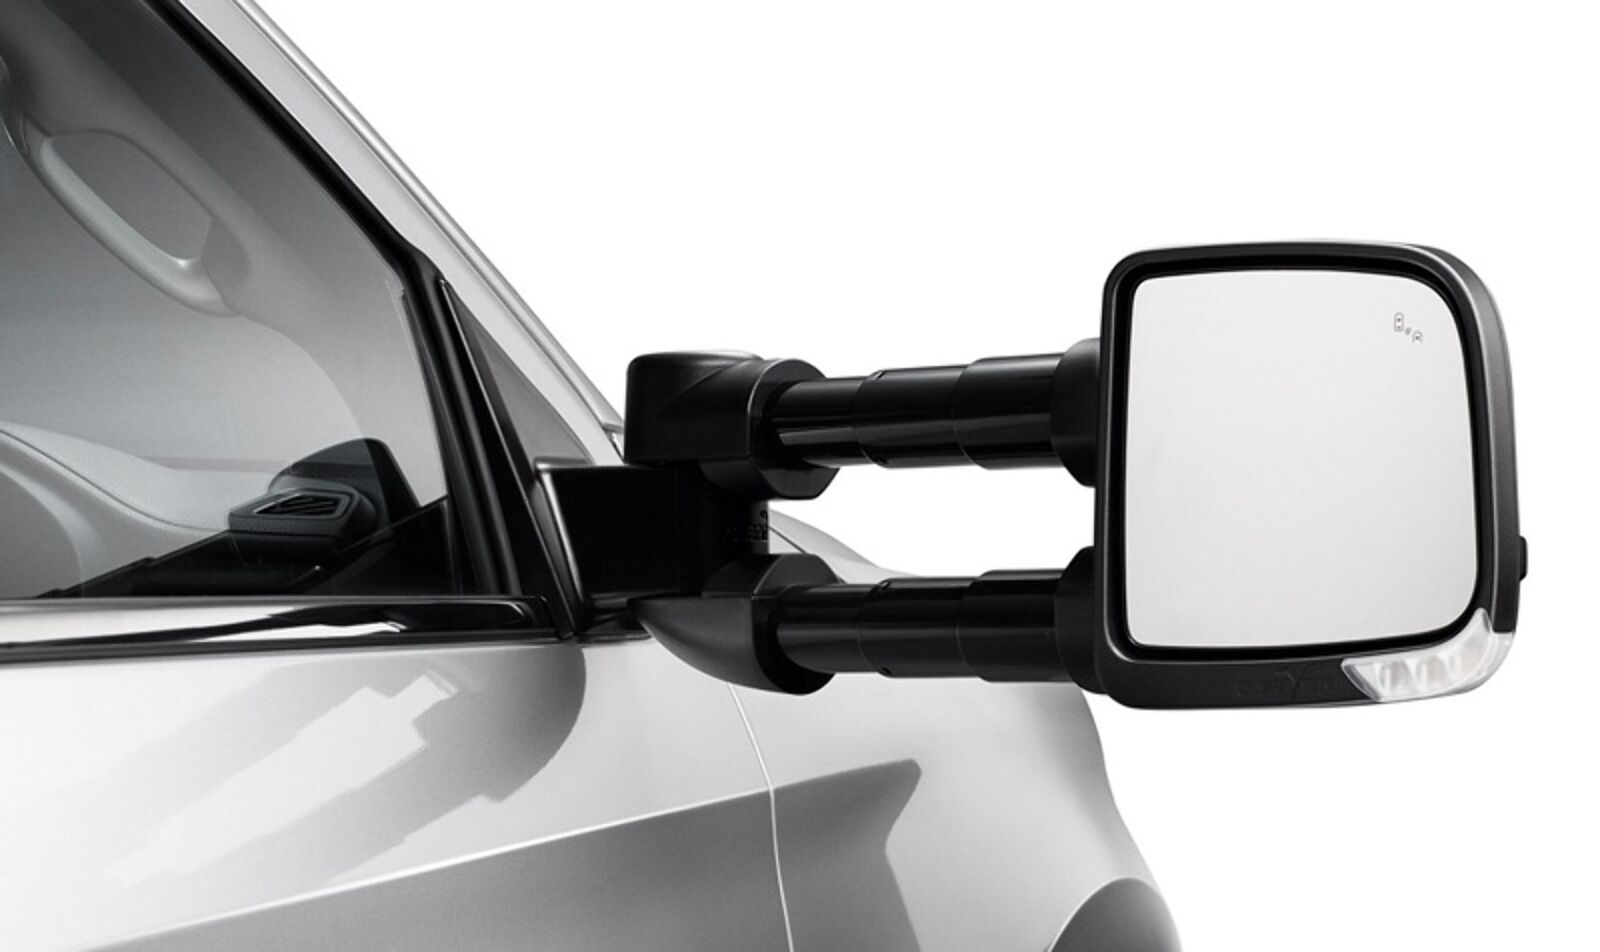 Isuzu D-Max (2009-2011) Clearview Towing Mirrors